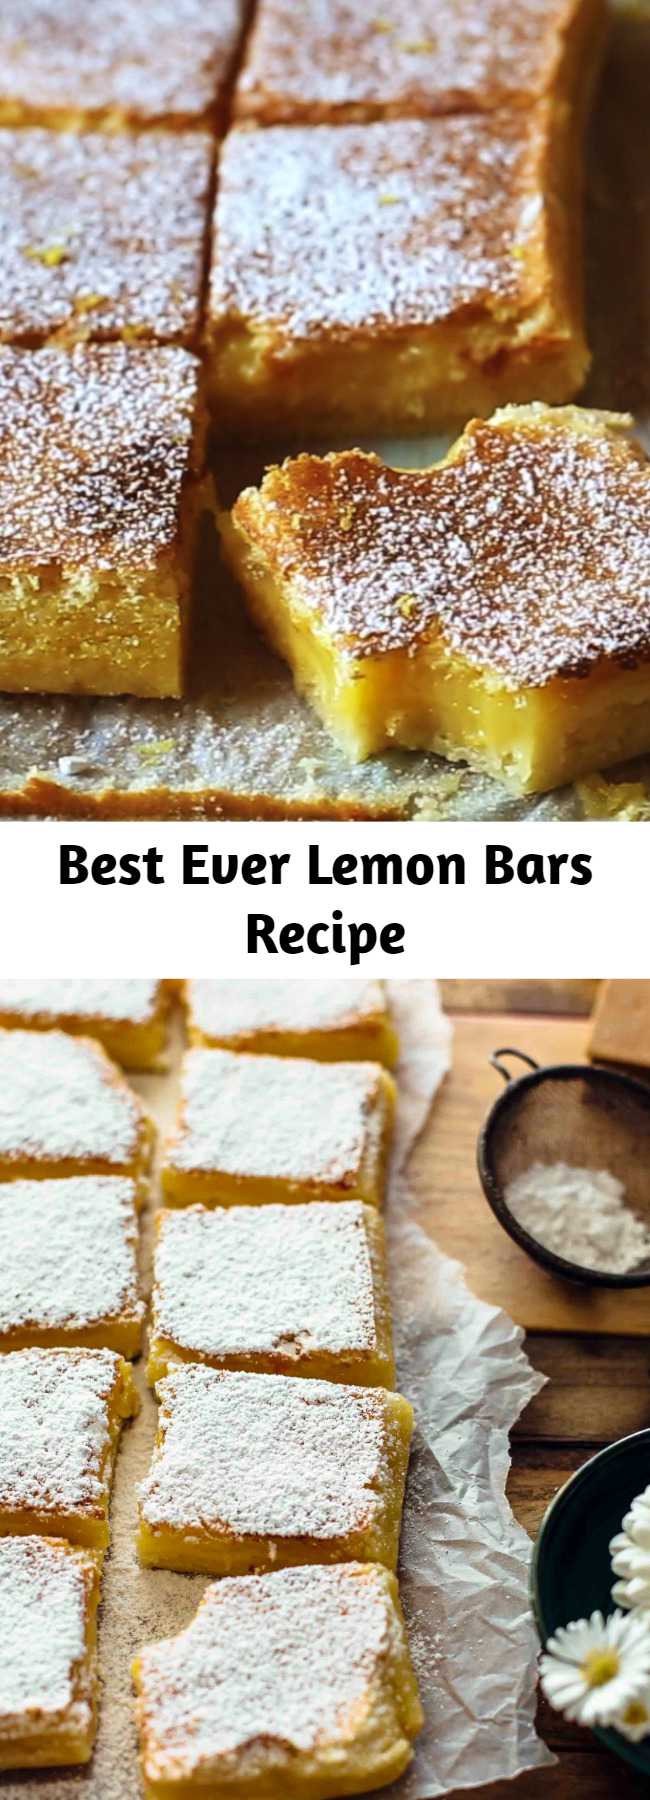 These Lemon Bars are sour and sweet and very easy to make. Buttery shortbread crust meets tangy lemon curd filling. You won’t be able to stop eating these. Just 7 ingredients! #lemonbars #lemon #sweets #desserts